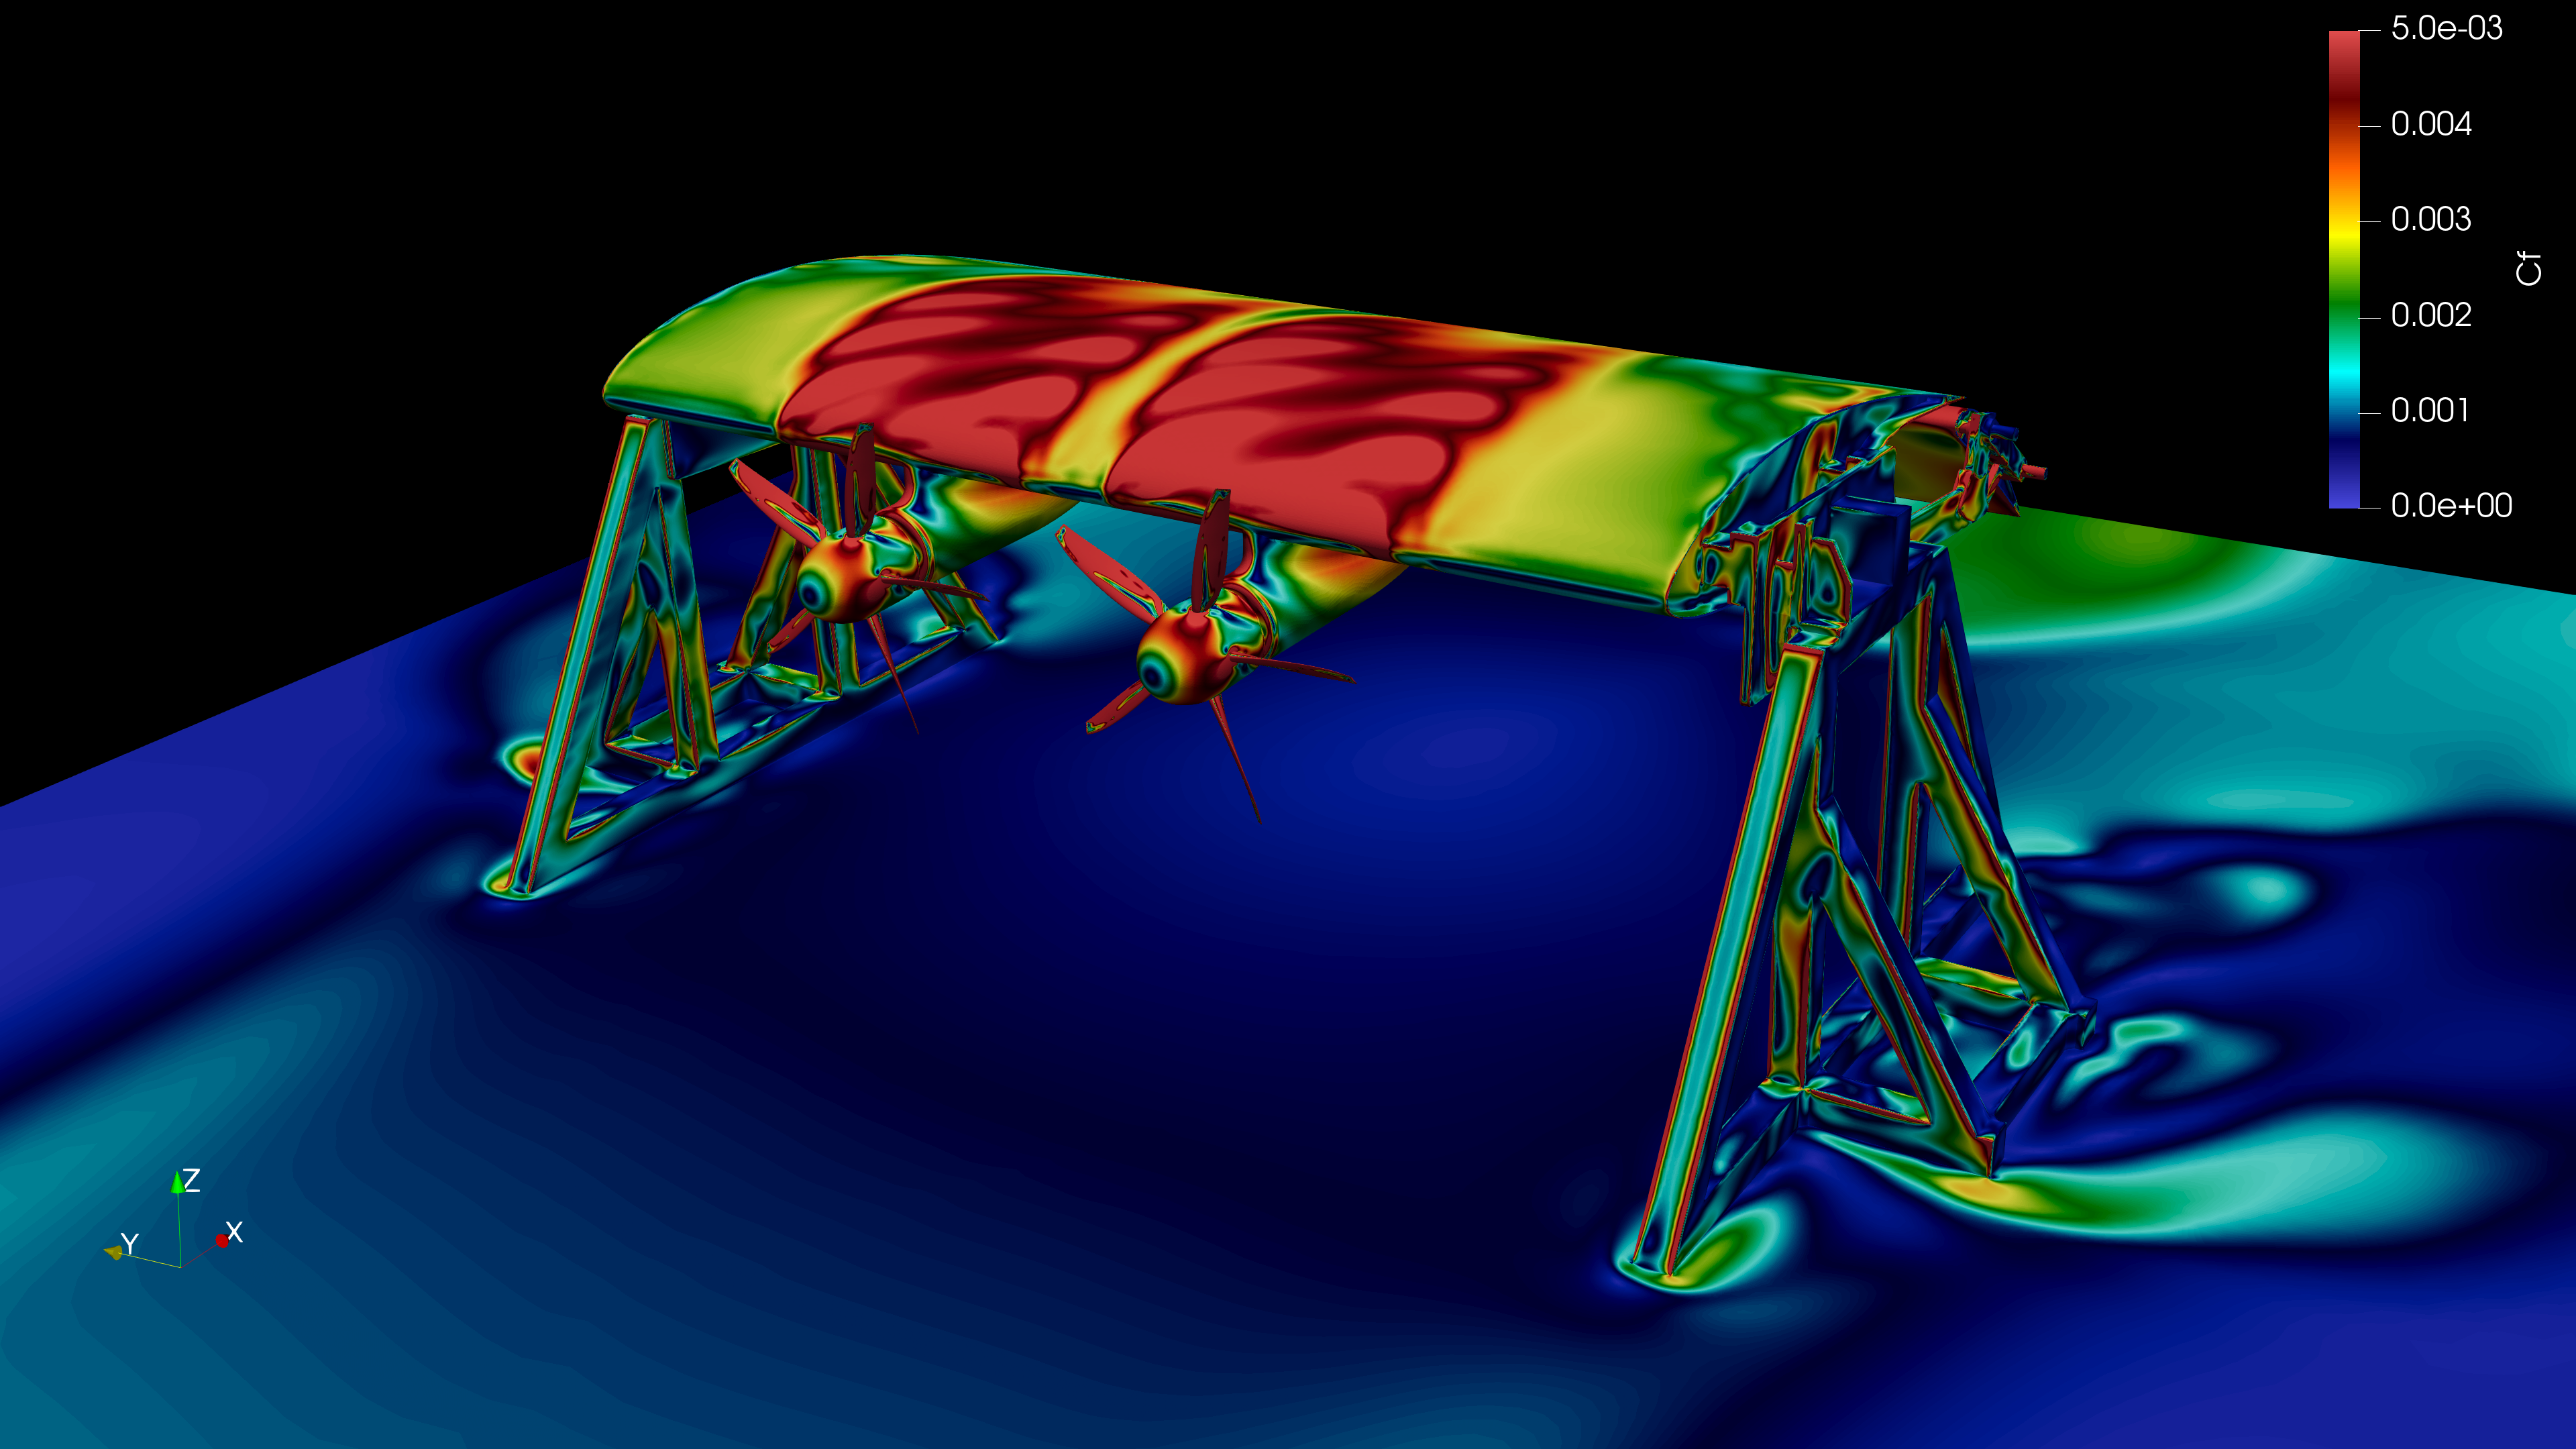 REGENT Seaglider CFD Analysis with Flow360